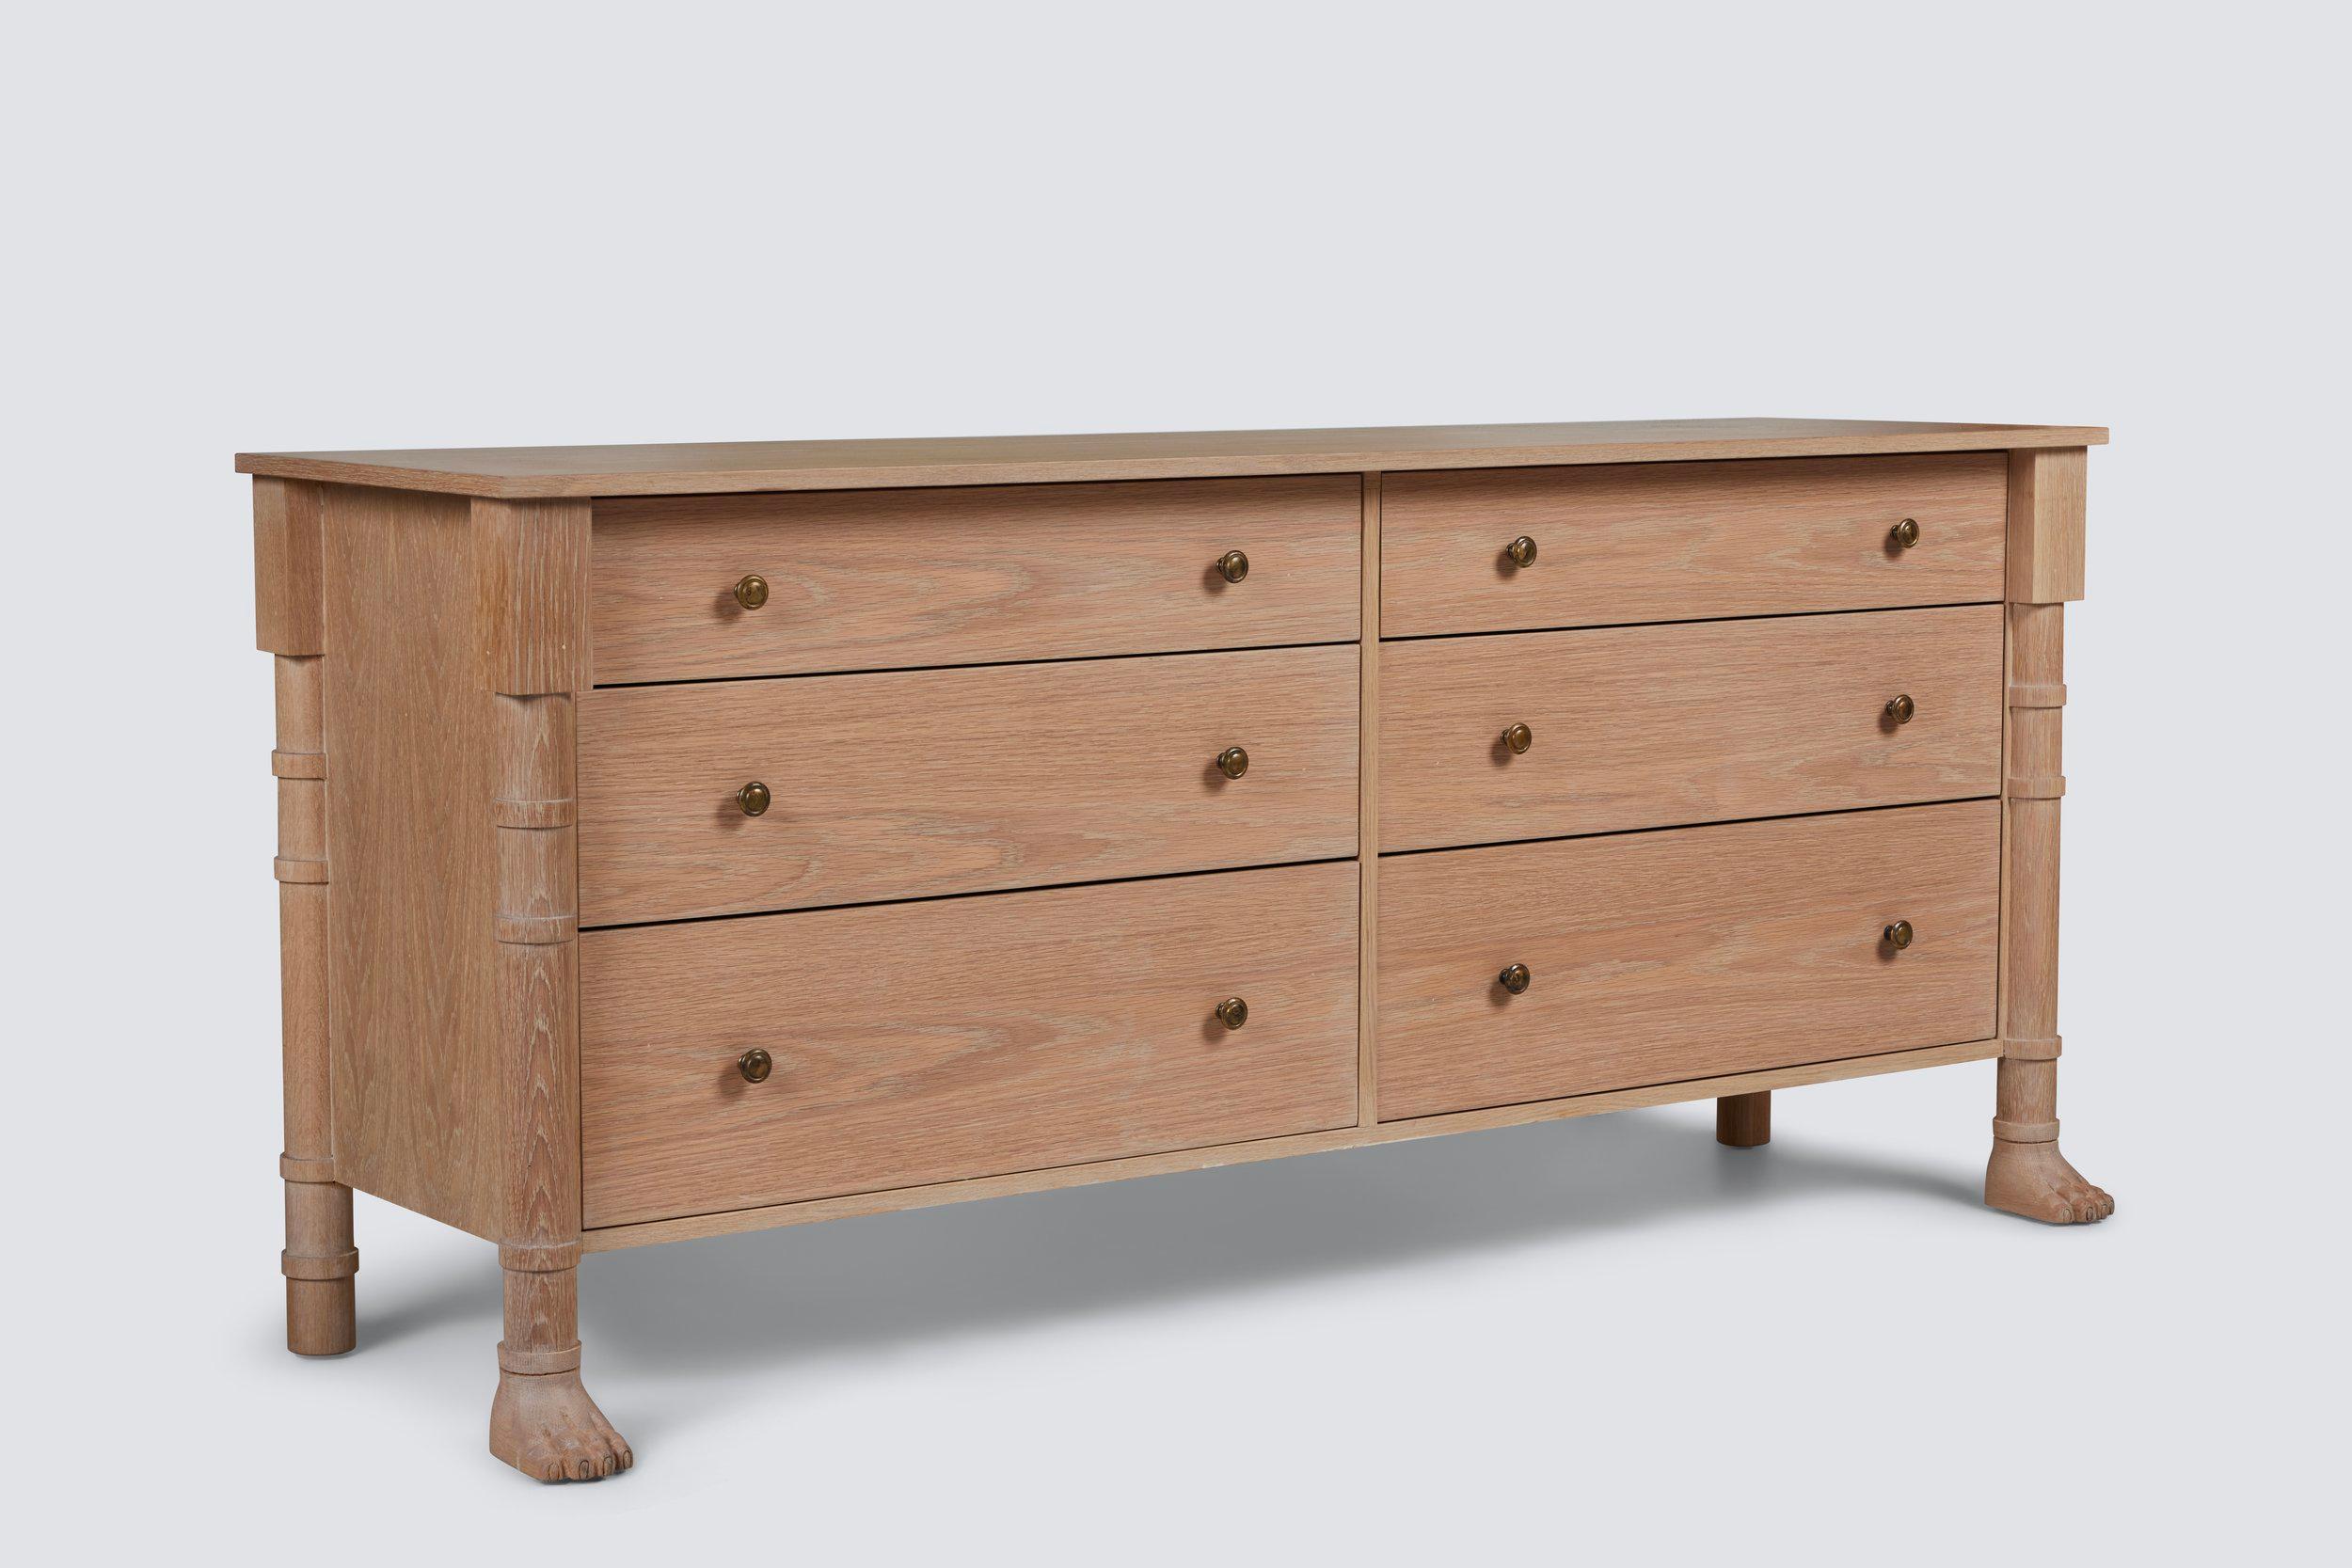 Martin & Brockett’s Lupa Dresser 72” features the Lupa Collection’s signature handcarved Lupa Feet, as well as turned details and 6 drawers, increasing in size from top to bottom.

72” L x 32” H x 20.5” D

Part of M&B’s Lupa Collection.

Available